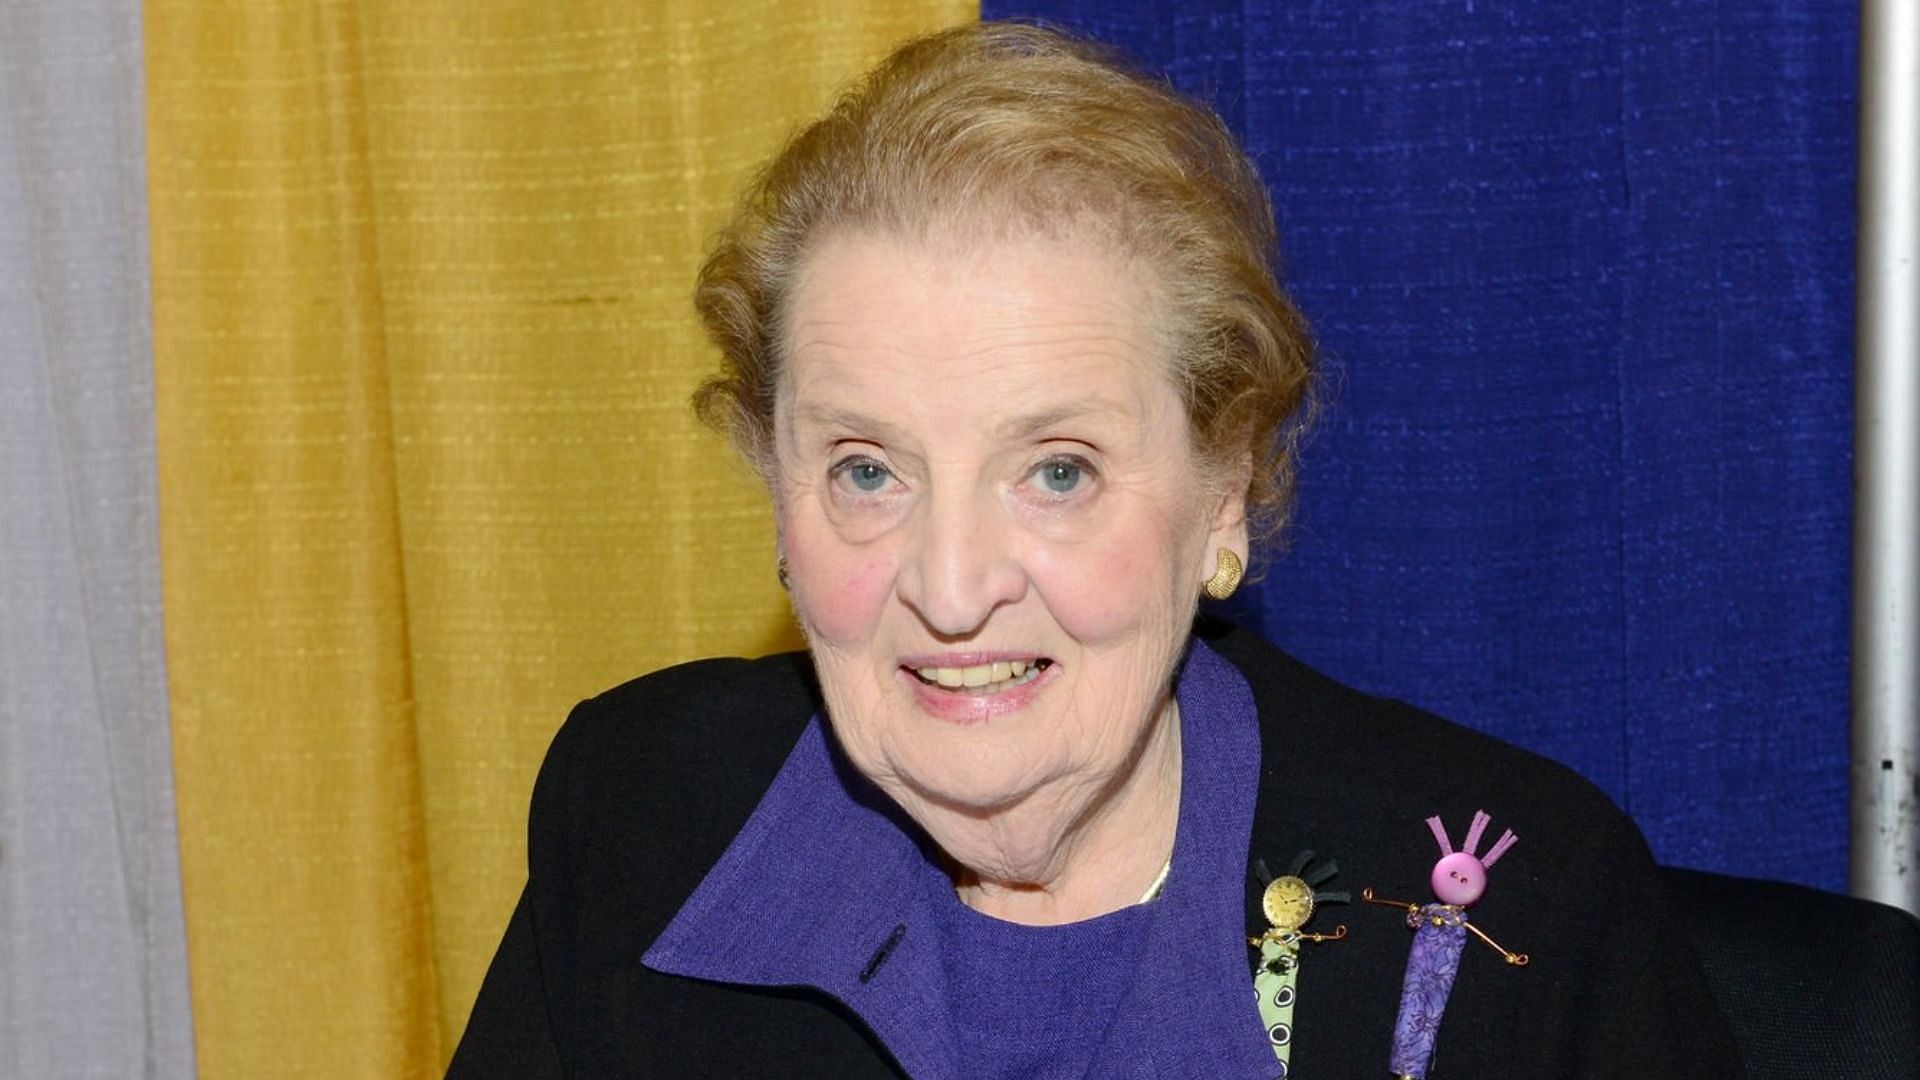 Former US Secretary of State Madeleine Albright passed away after a battle with cancer (Image via Lisa Lake/Getty Images)